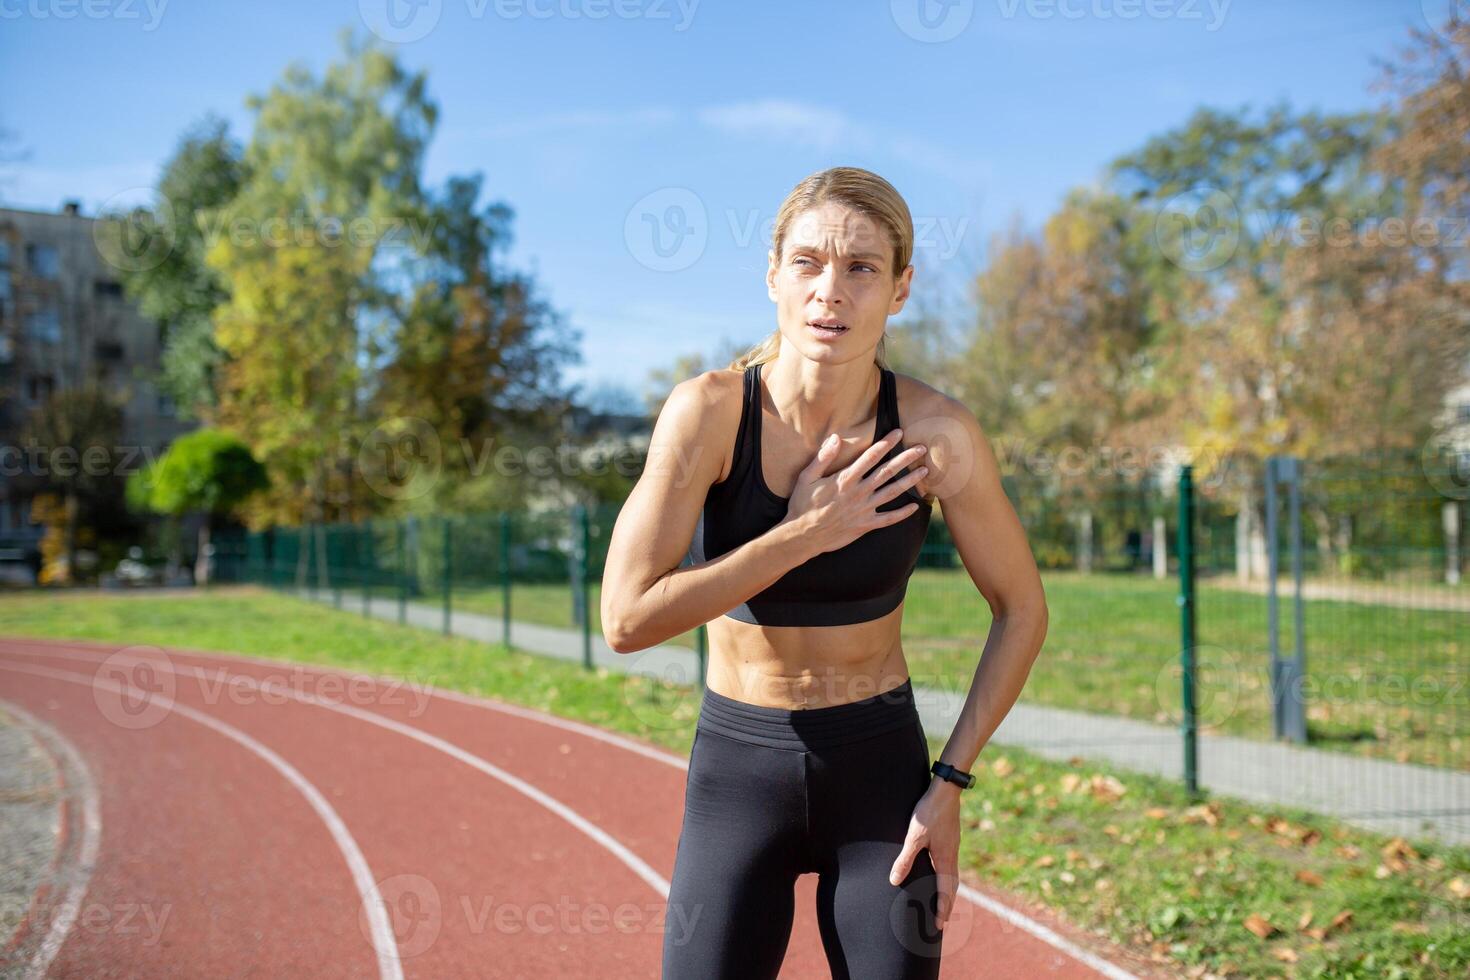 Focused sportswoman taking a break on running track, hands on knees, feeling exhaustion after sprint. Concept of determination and fitness training. photo